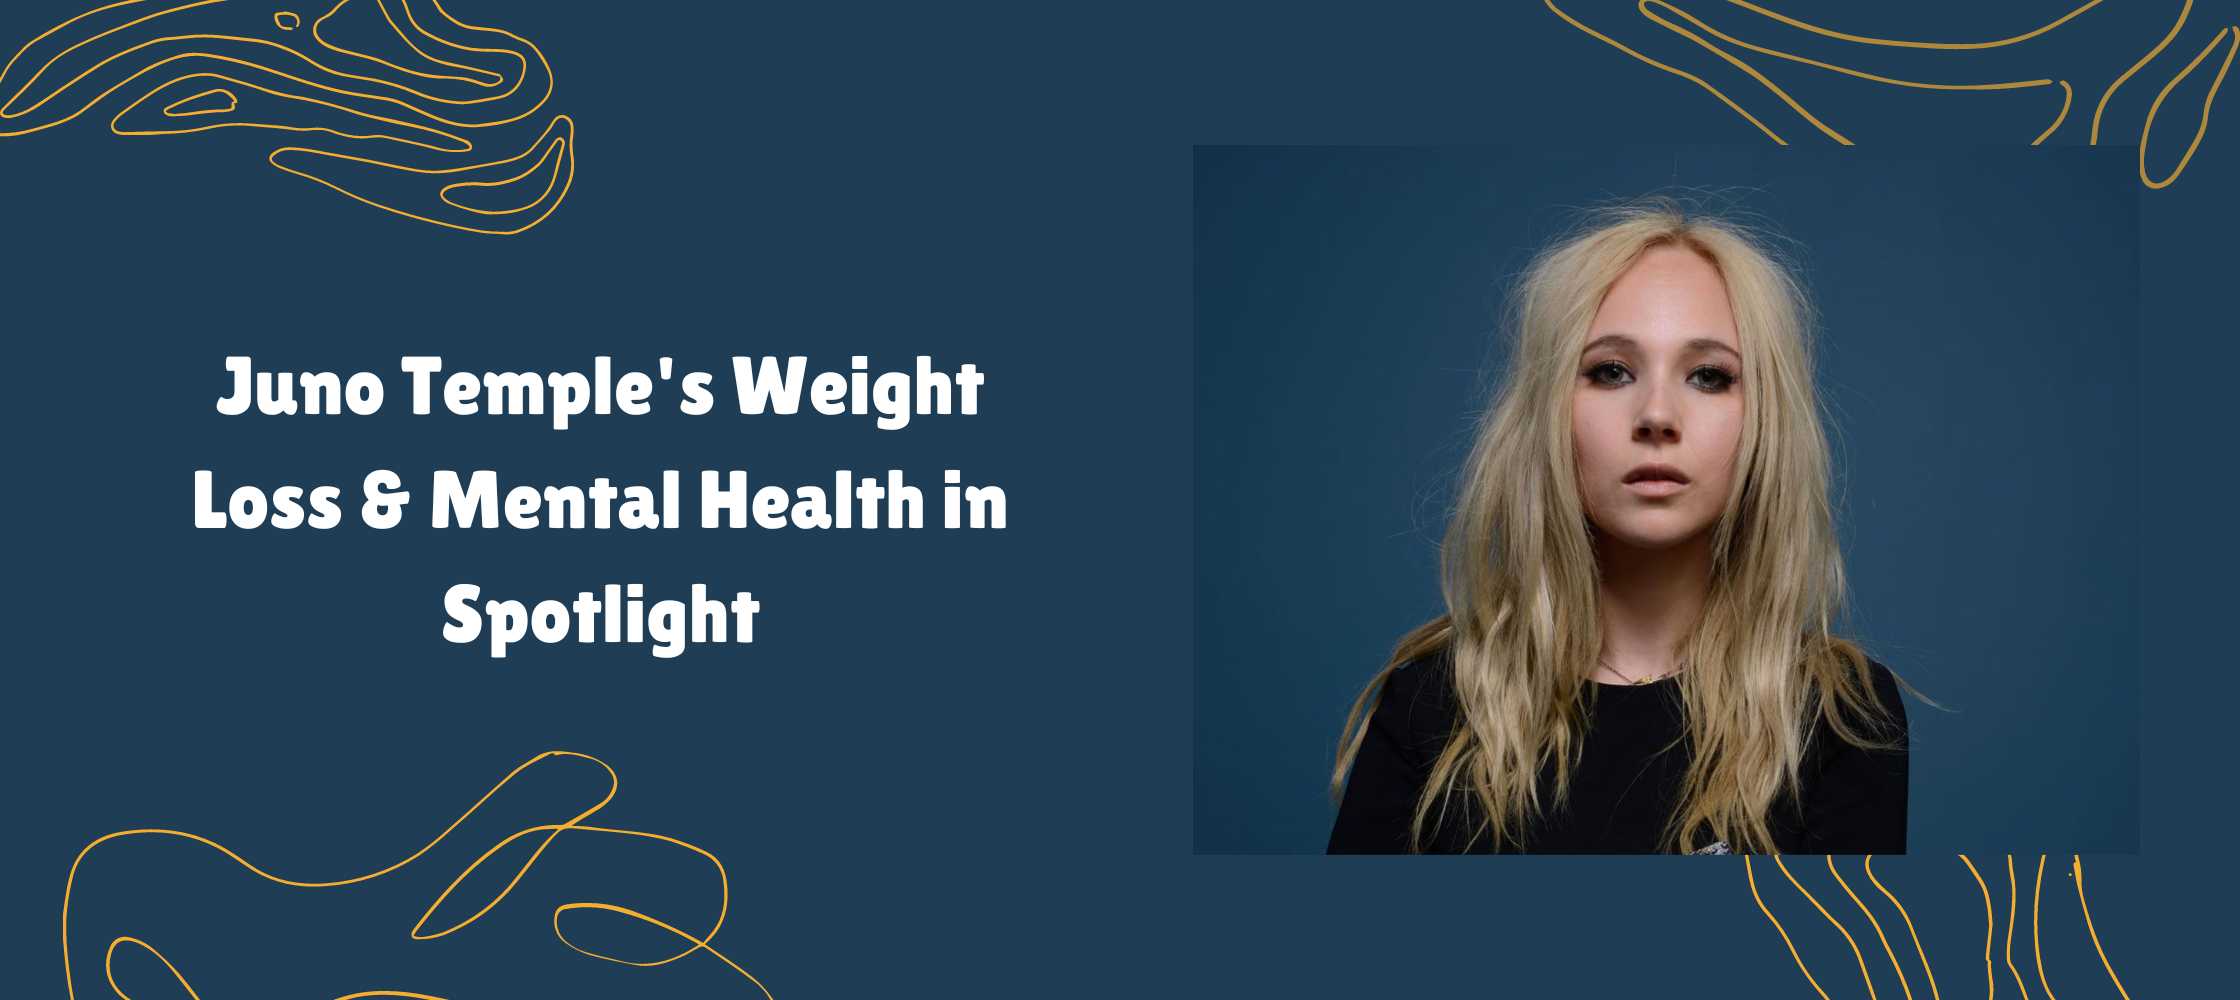 Juno Temple's Weight Loss